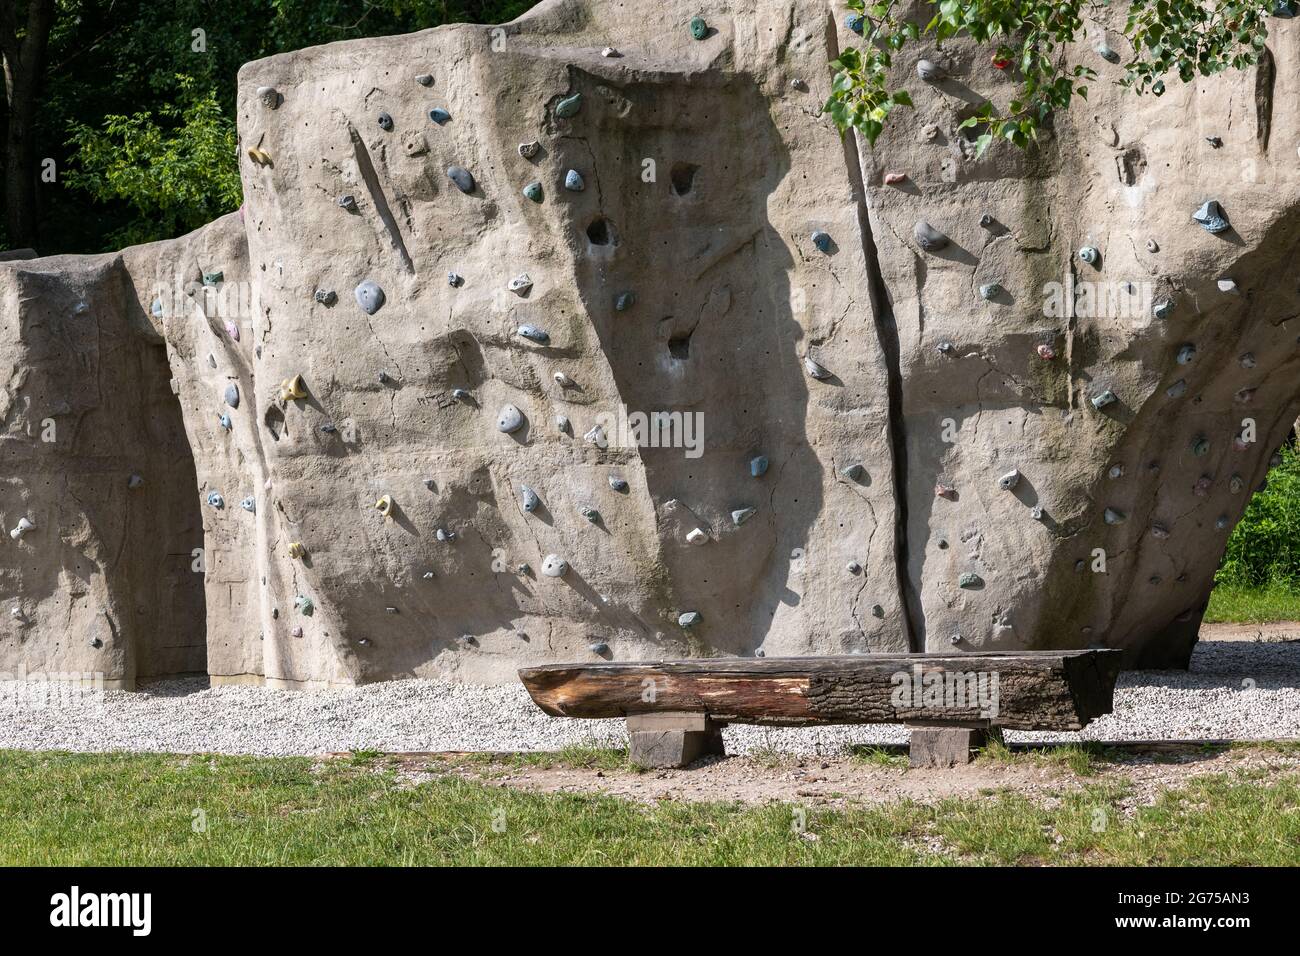 Public climbing wall in urban park, manmade rock with holds and grips for  hands and feet Stock Photo - Alamy